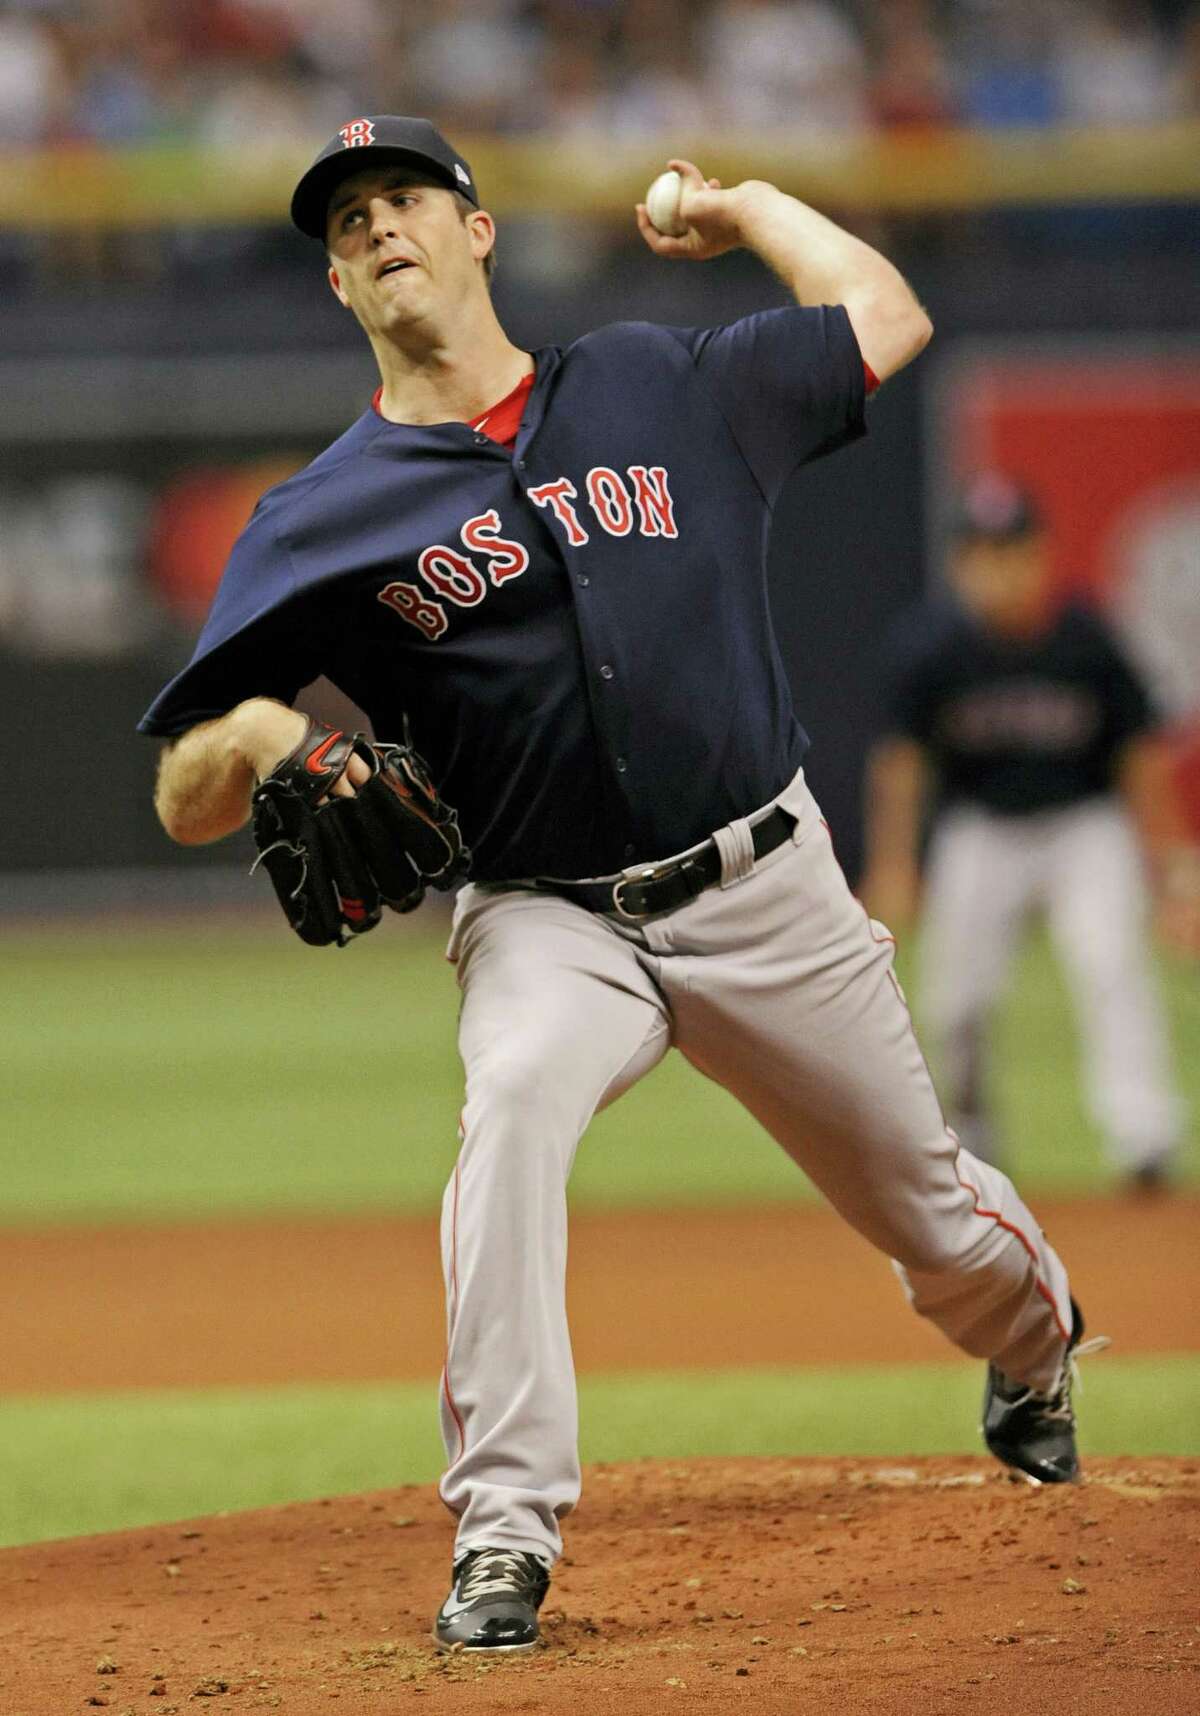 Red Sox starter Drew Pomeranz pitches against the Rays on Friday.